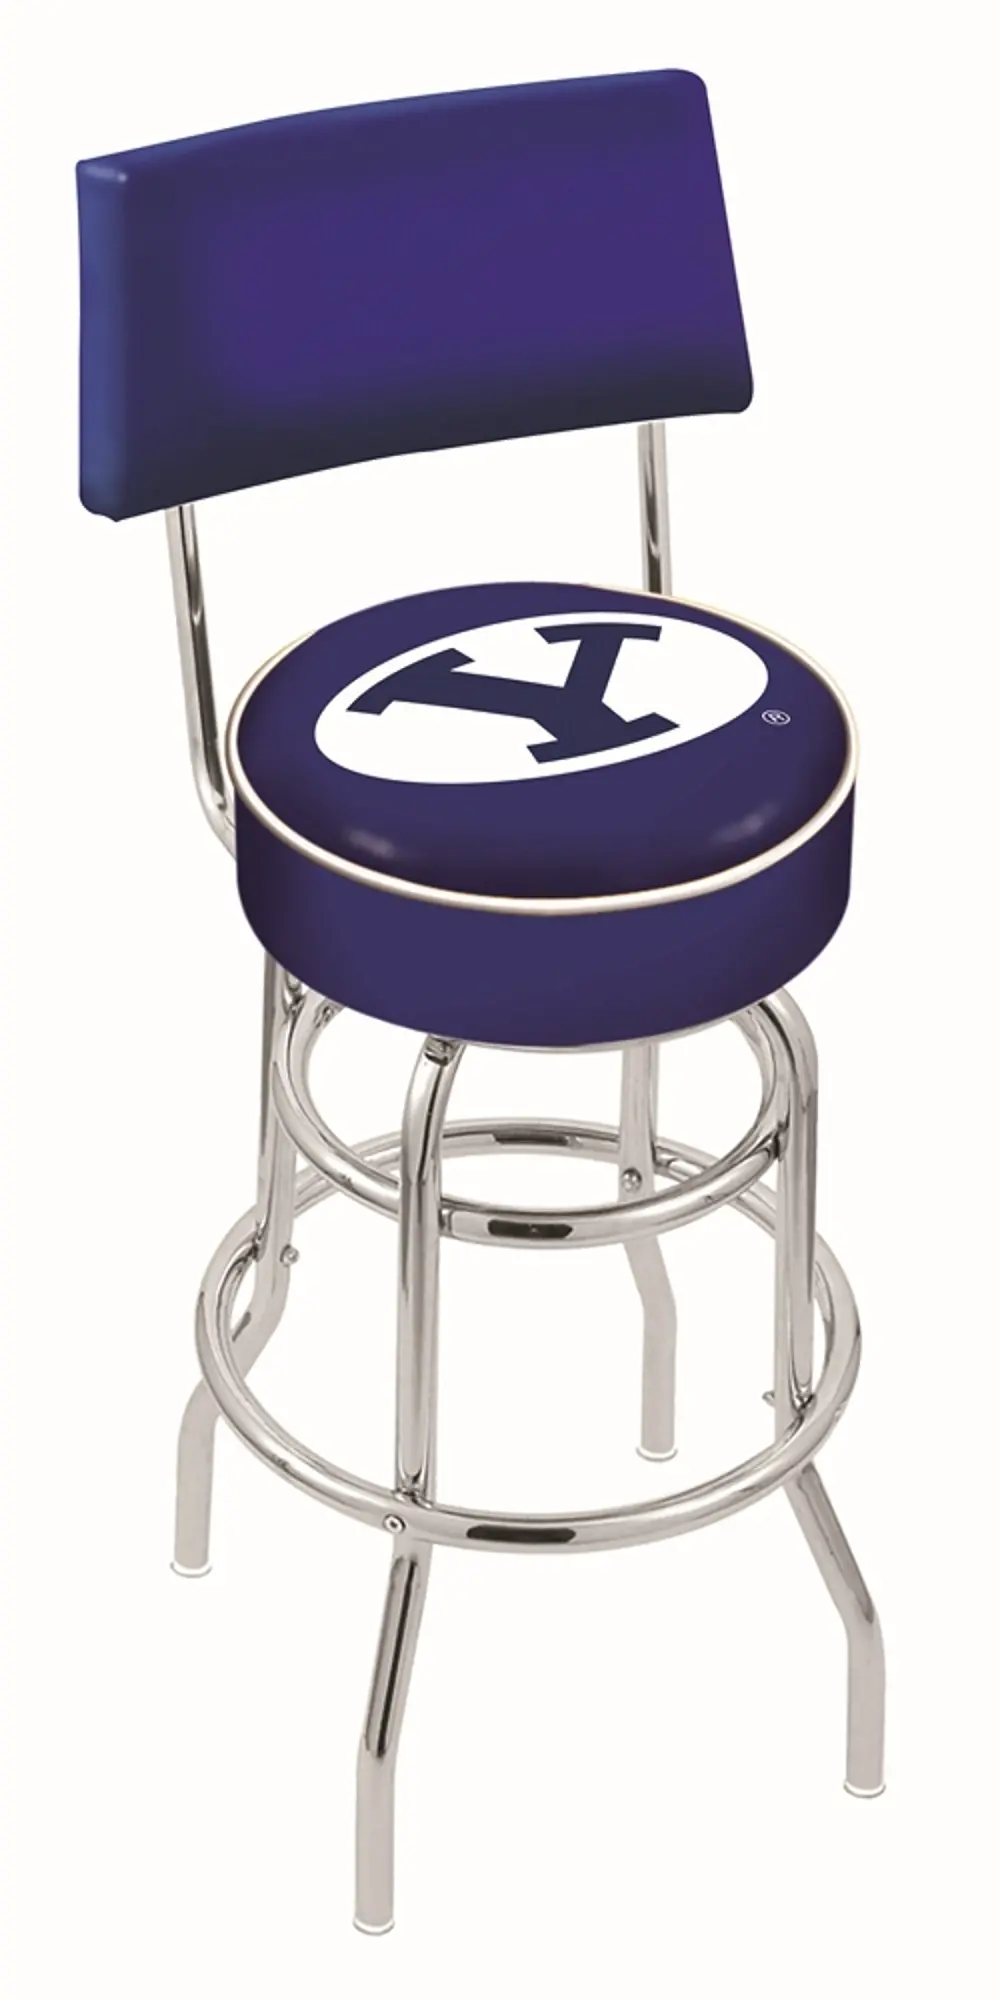 Chrome Swivel Counter Height Stool with Back Rest - BYU-1